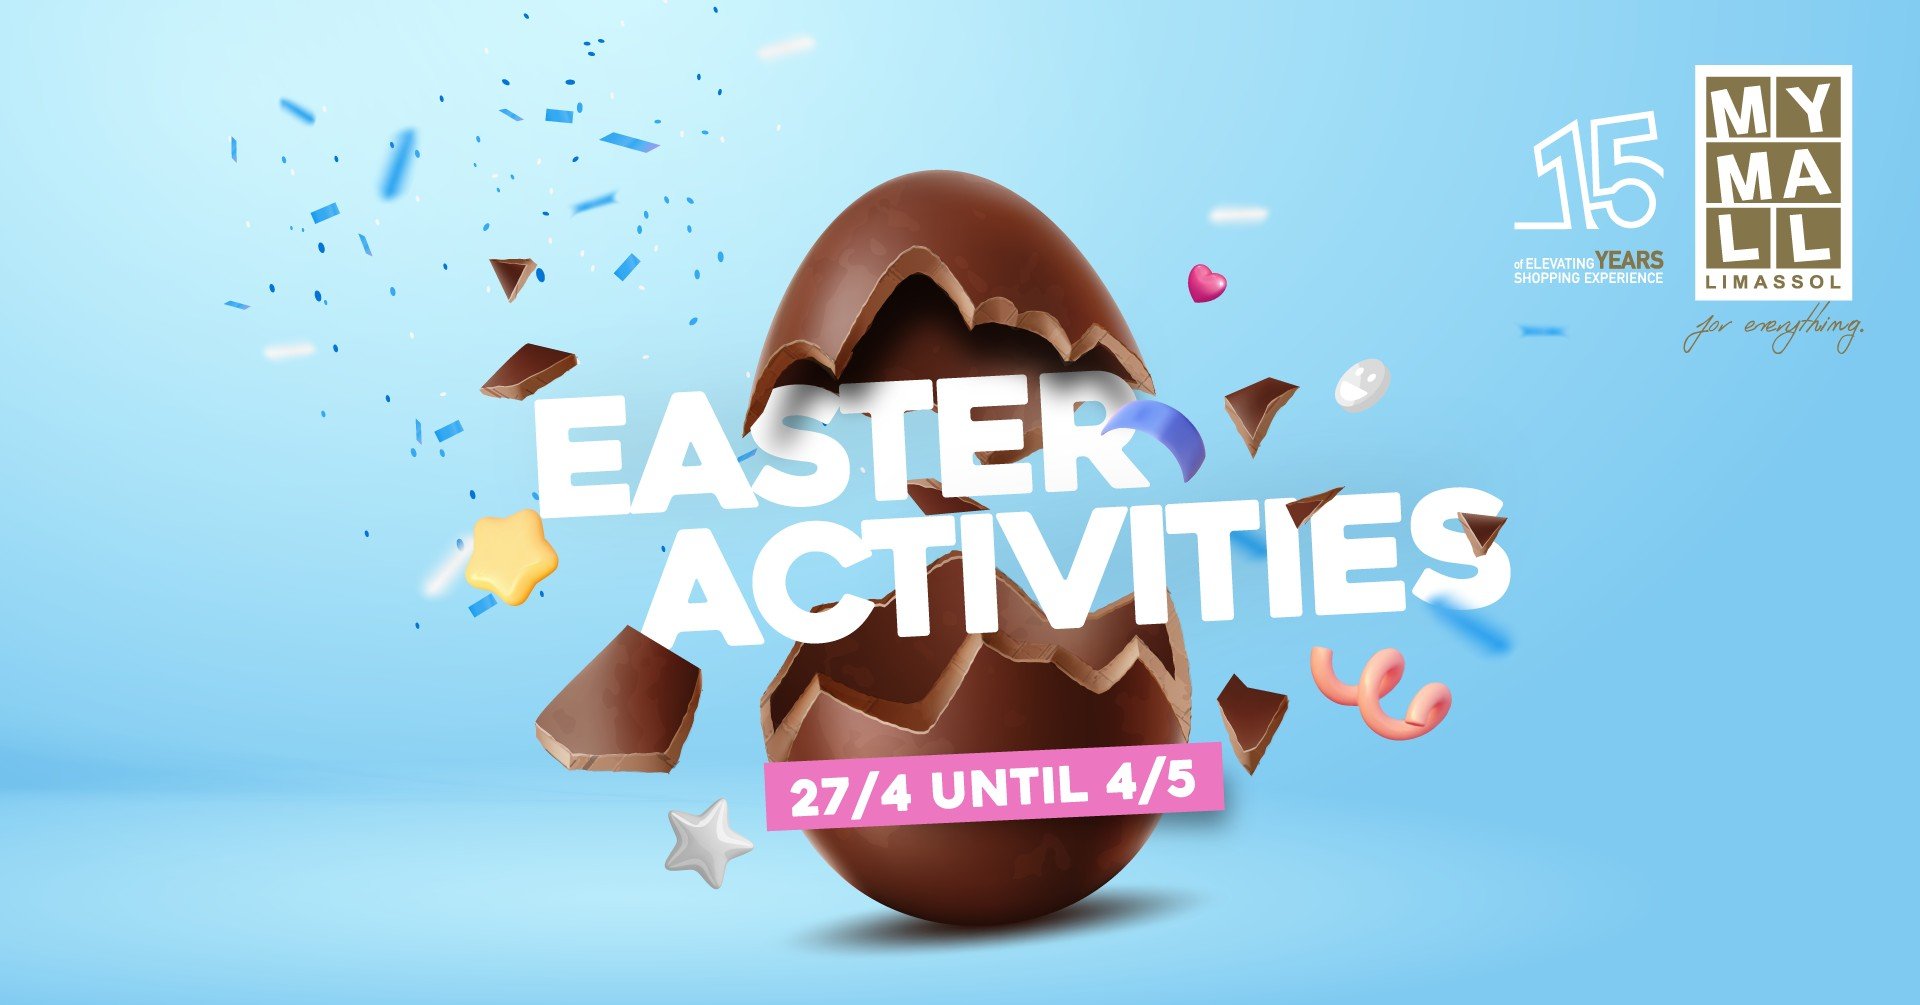 easter activities my mall